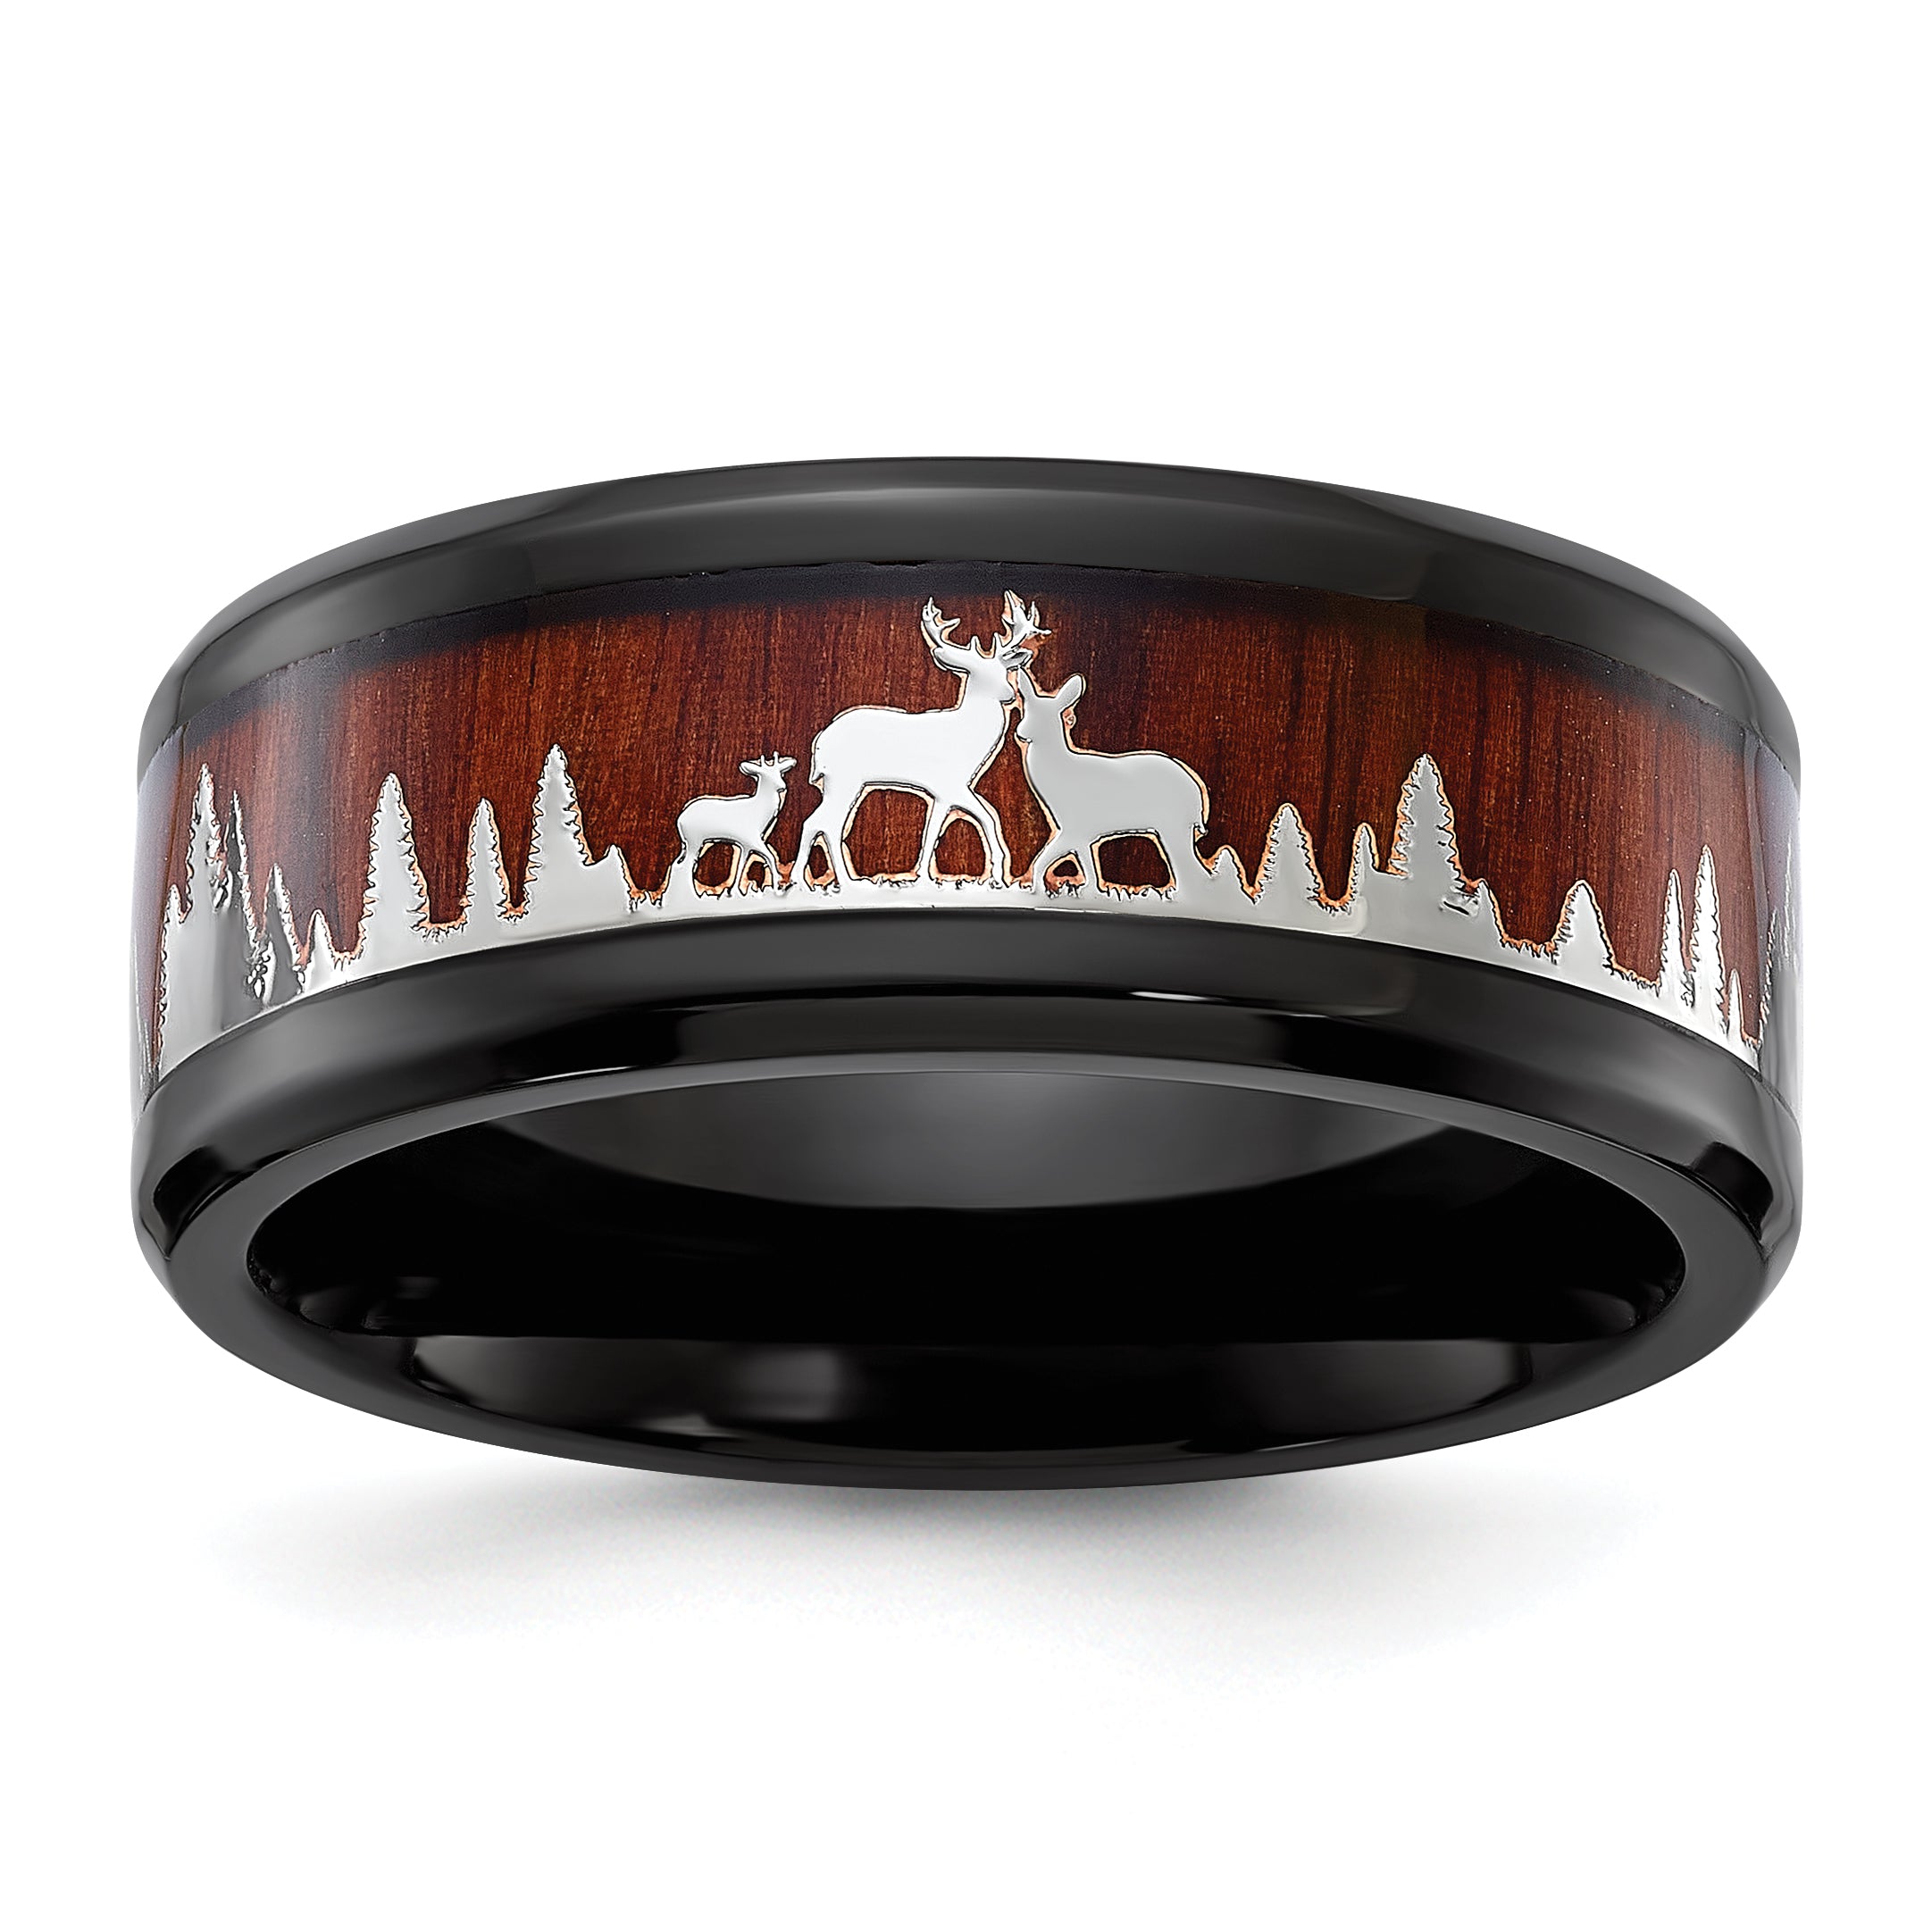 Stainless Steel Polished Black IP-plated with Wood Inlay Deer in Forest Design 9mm Band